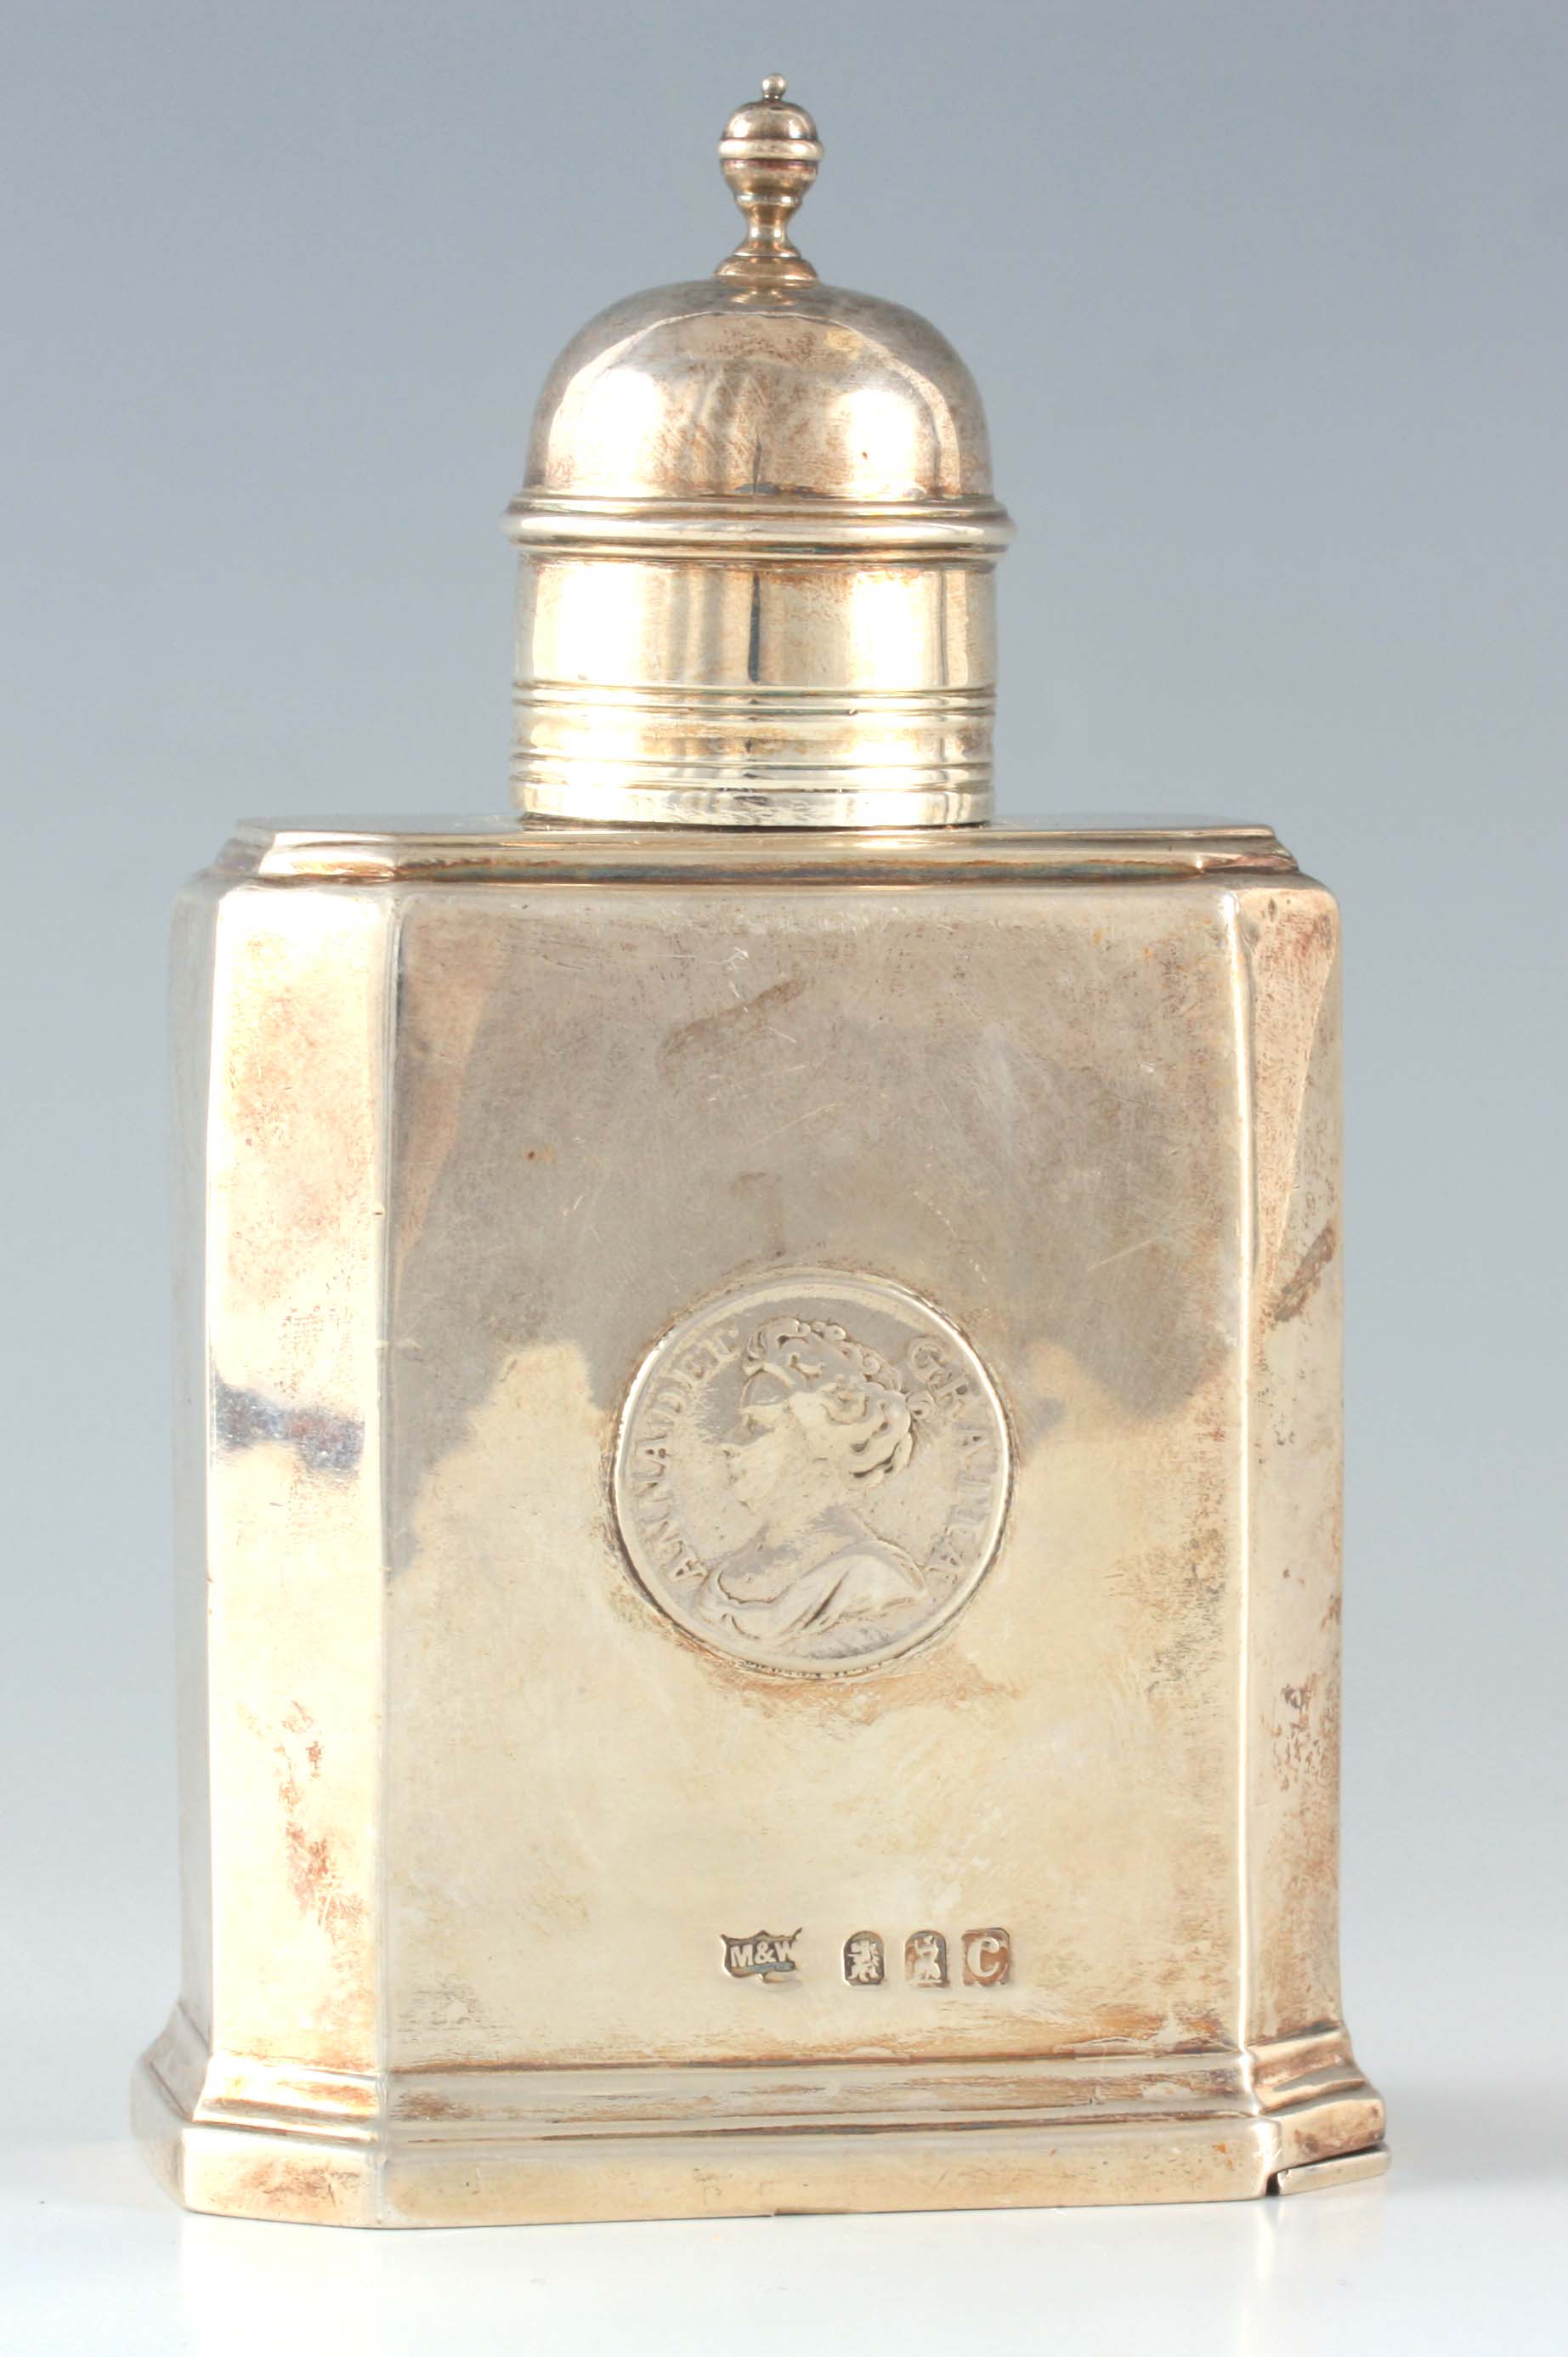 A LATE 19TH CENTURY SILVER TEA CADDY BY MAPPIN AND WEBB with domed finial and clipped corners by